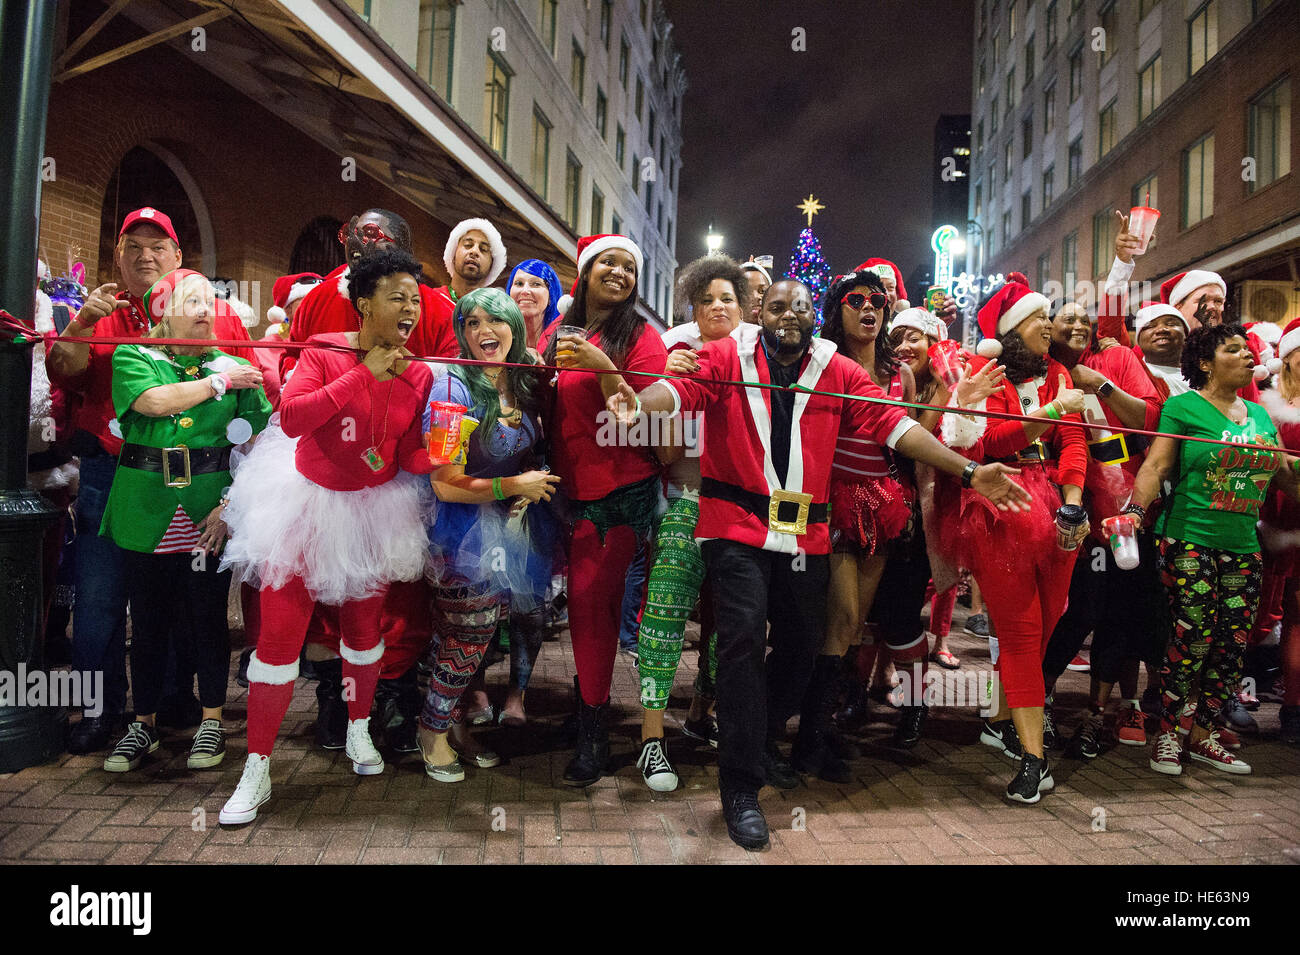 Costumed Santas'  break the start line during the 6th Annual Running of the Santas festival in New Orleans, La. on Saturday, Dec. 17, 2016. The Running of the Santas is now a national, annual bar tour that started with 40 Santas in Philadelphia with the goal to raise money for local charities. Stock Photo